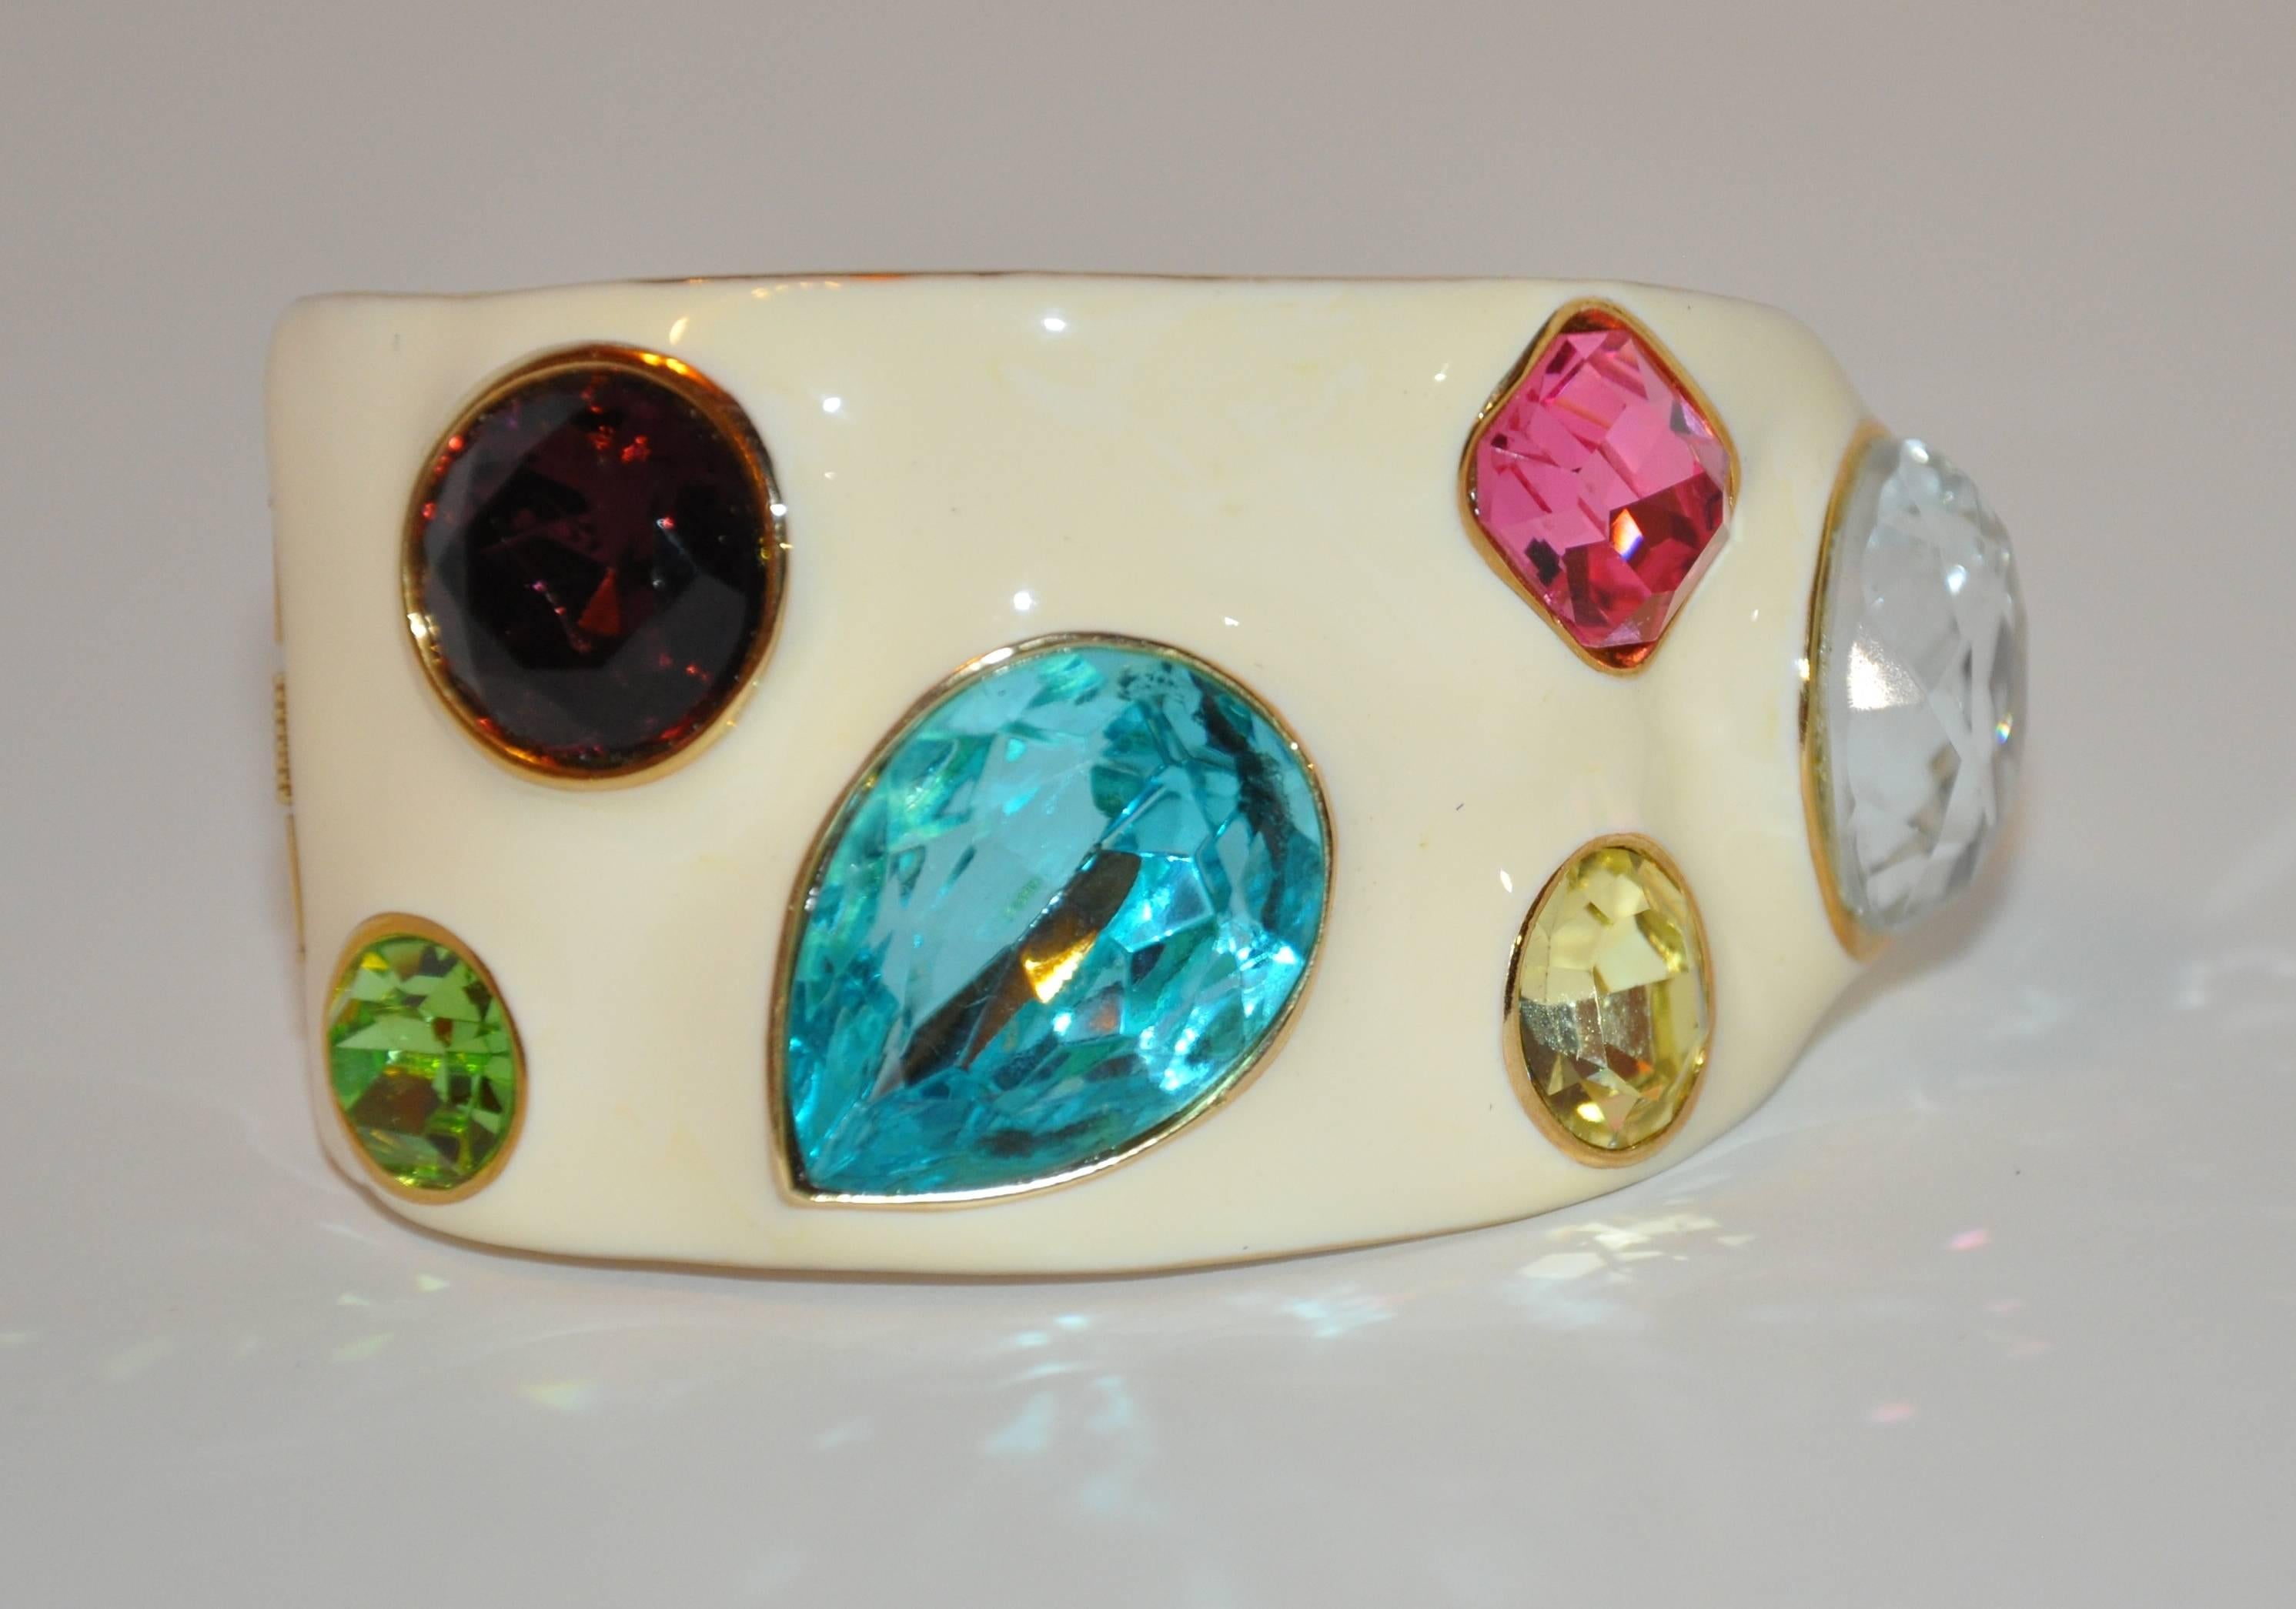      The famed Kenneth Jay Lane, who recently left us, created this wonderful vanilla enamel cuff bracelet accented with multi-size multi-colors encased in gilded gold hardware measures 2 1/2" x 1 5/8". Width is 6/8" - 1 1/2",